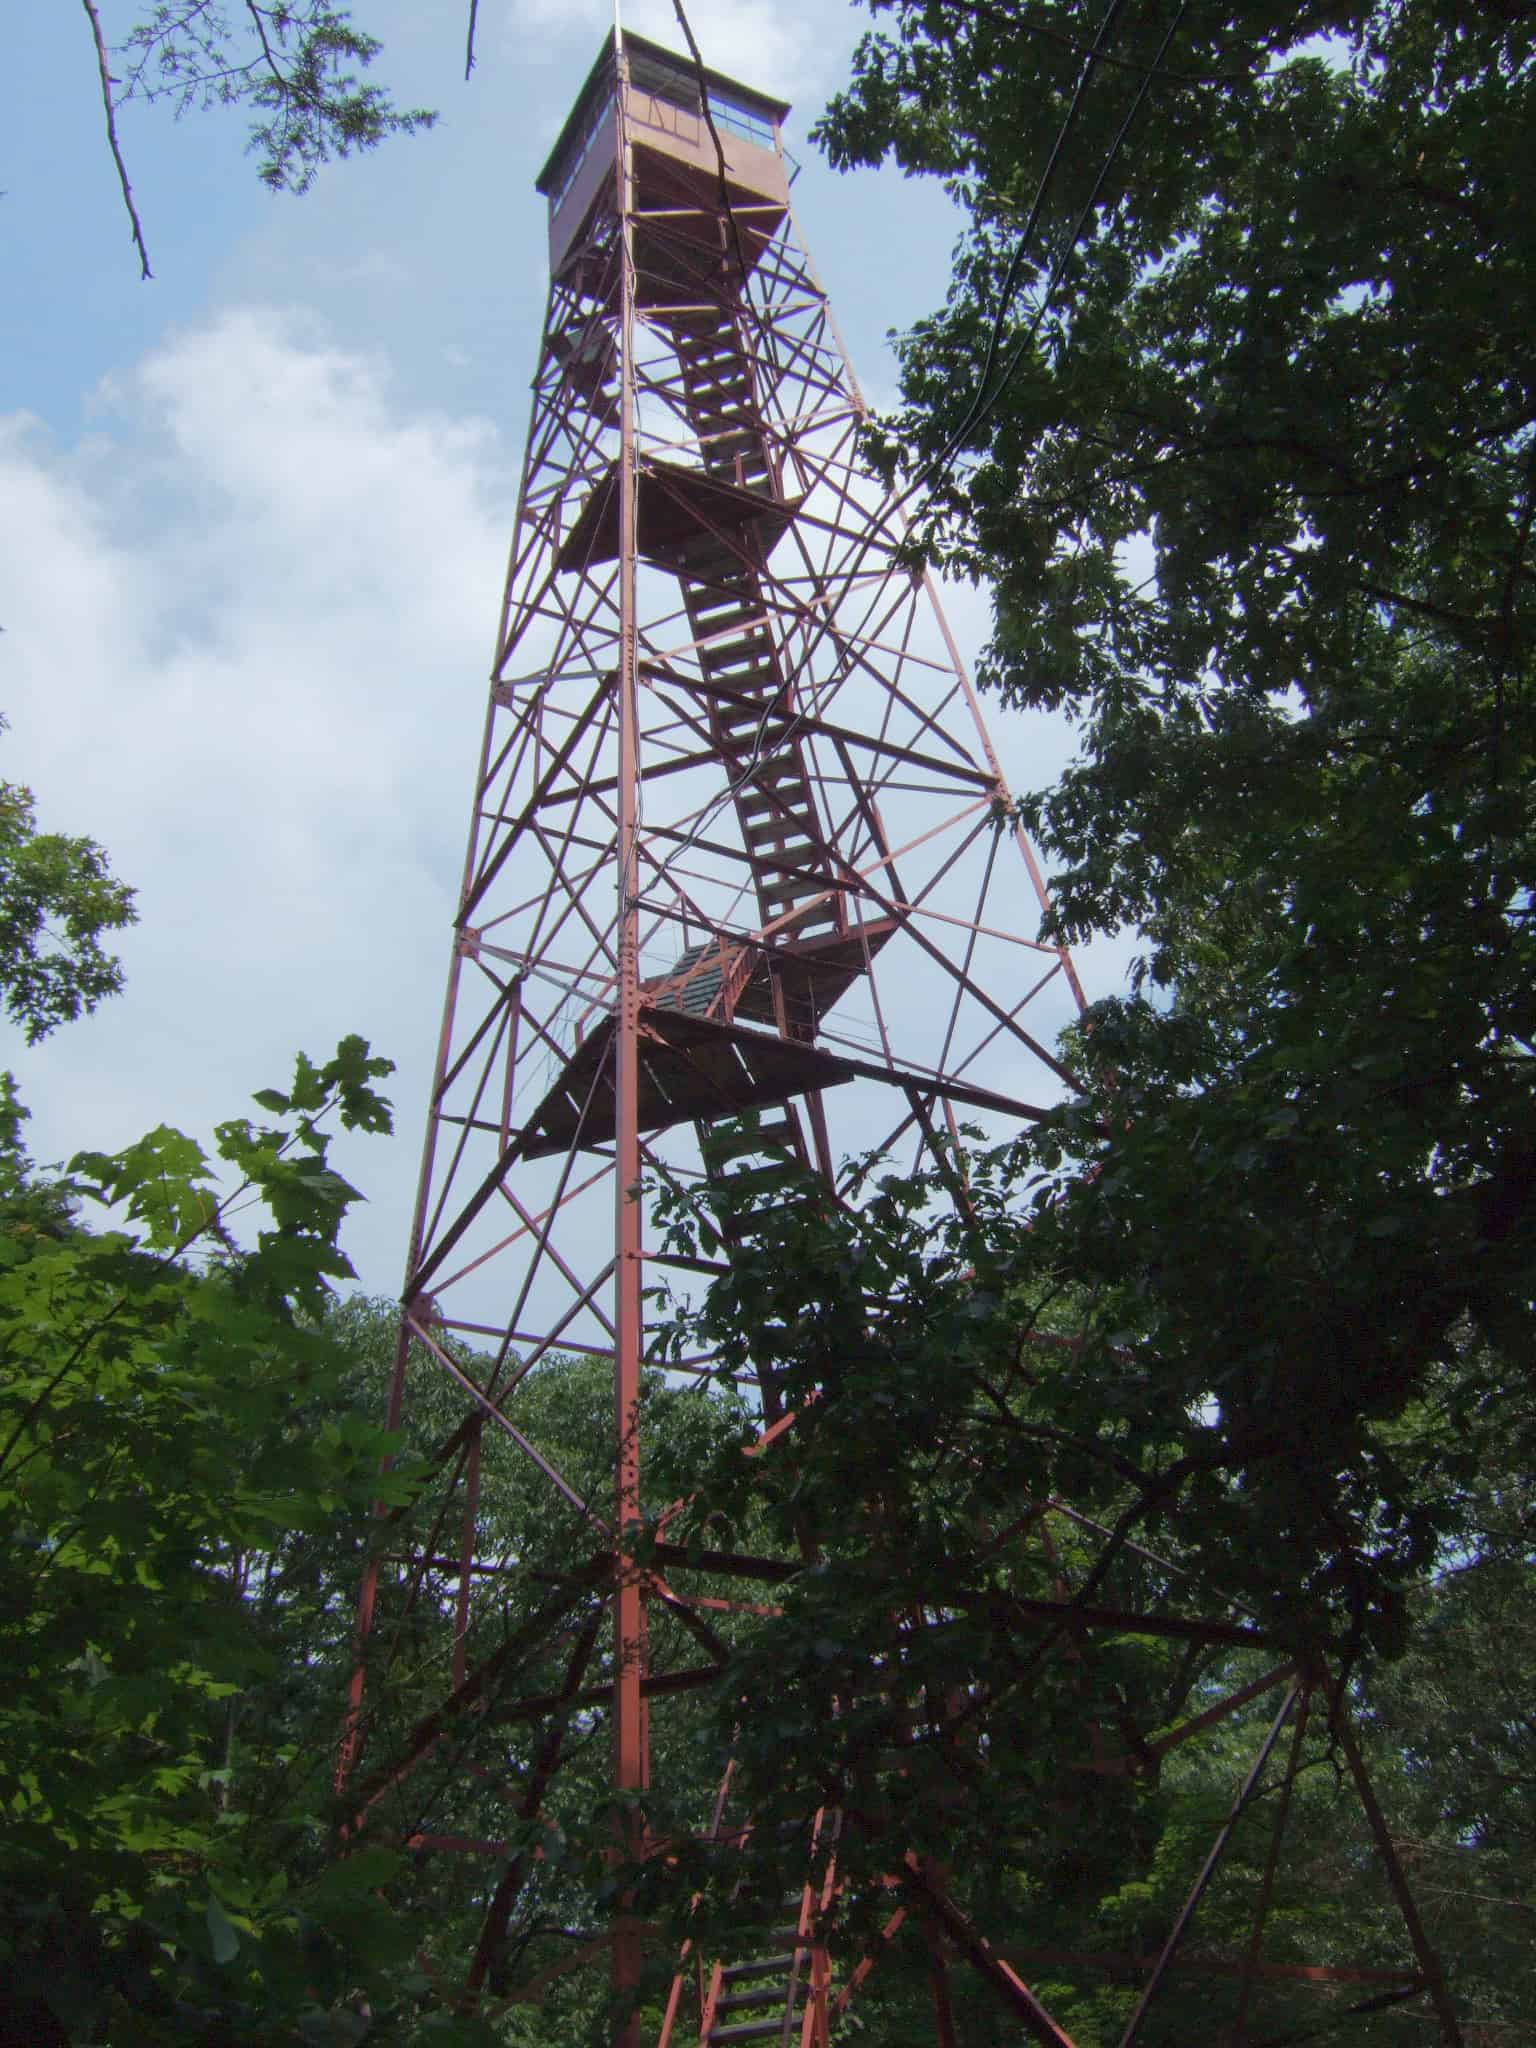 The fire tower at French Creek State Park